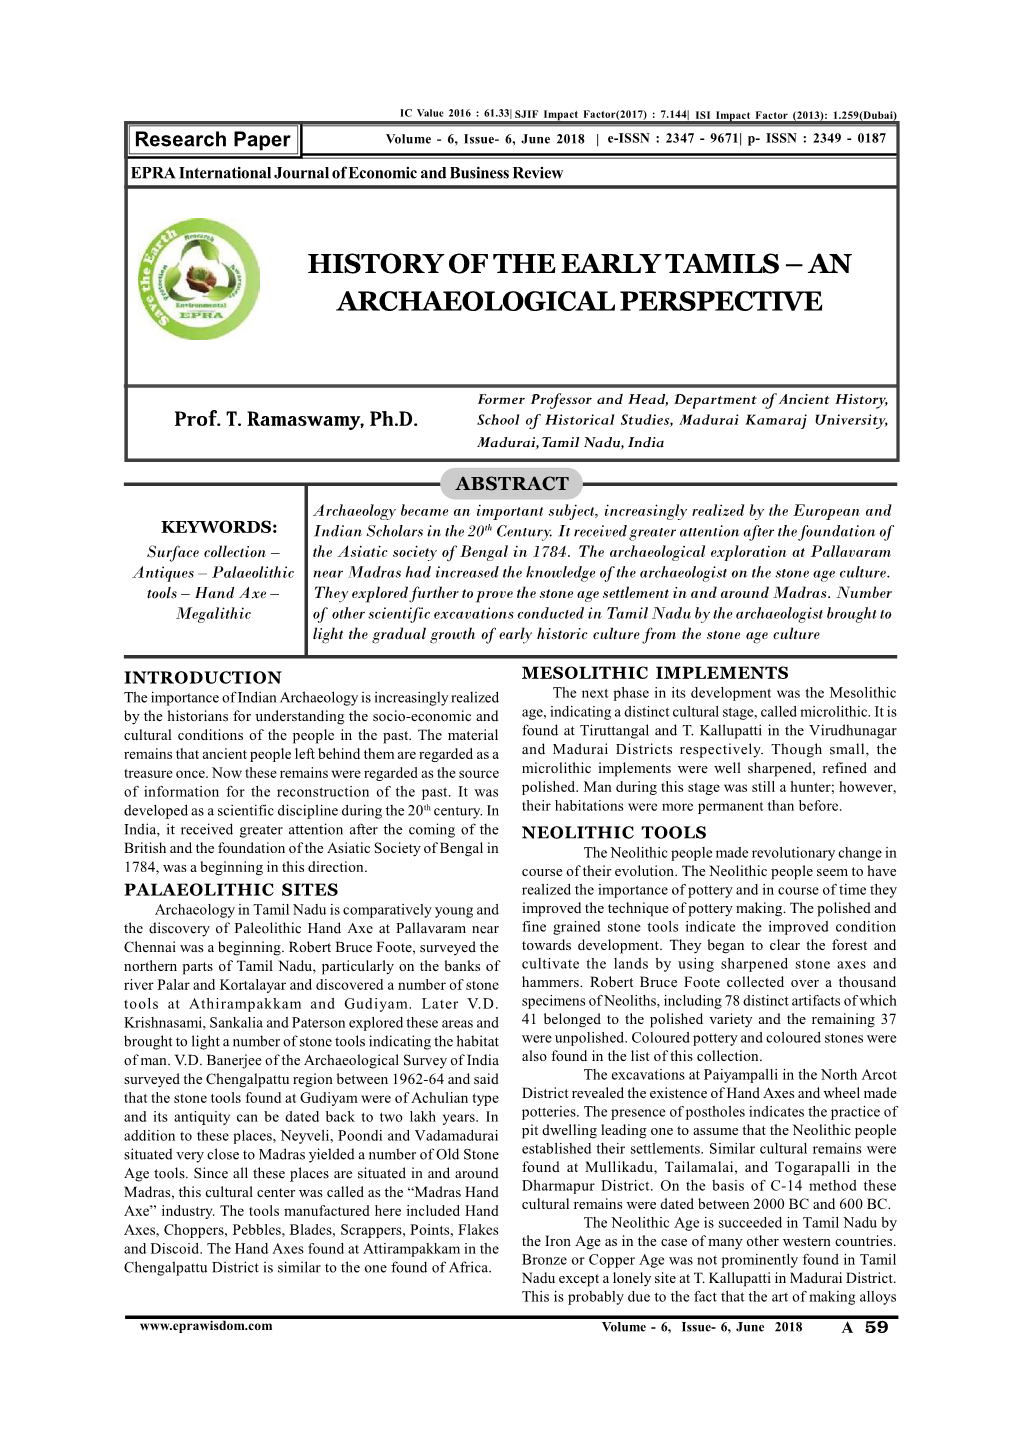 History of the Early Tamils – an Archaeological Perspective